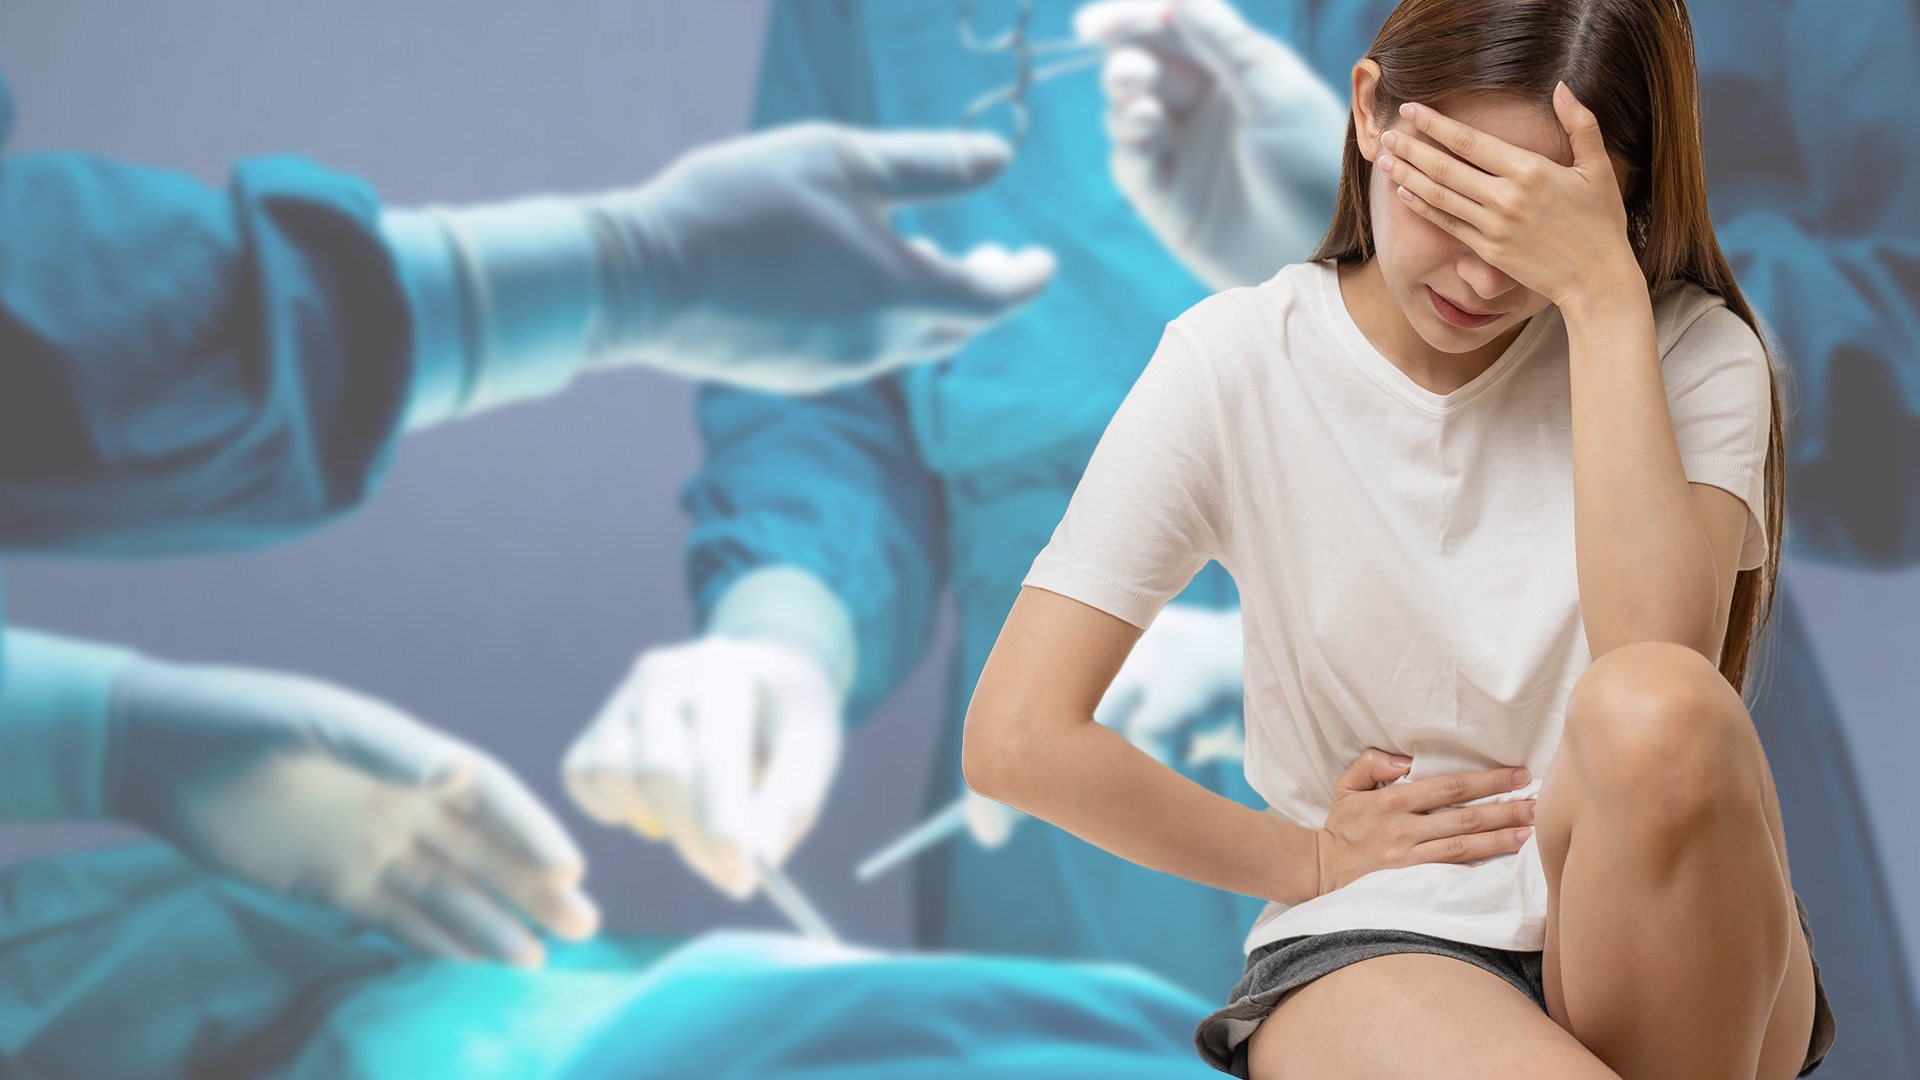 A young woman in China who planned to marry was shocked to discover that she is, infact, biologically a man after doctors performed tests which found a testicle in her abdomen. Photo: SCMP composite/Shutterstock